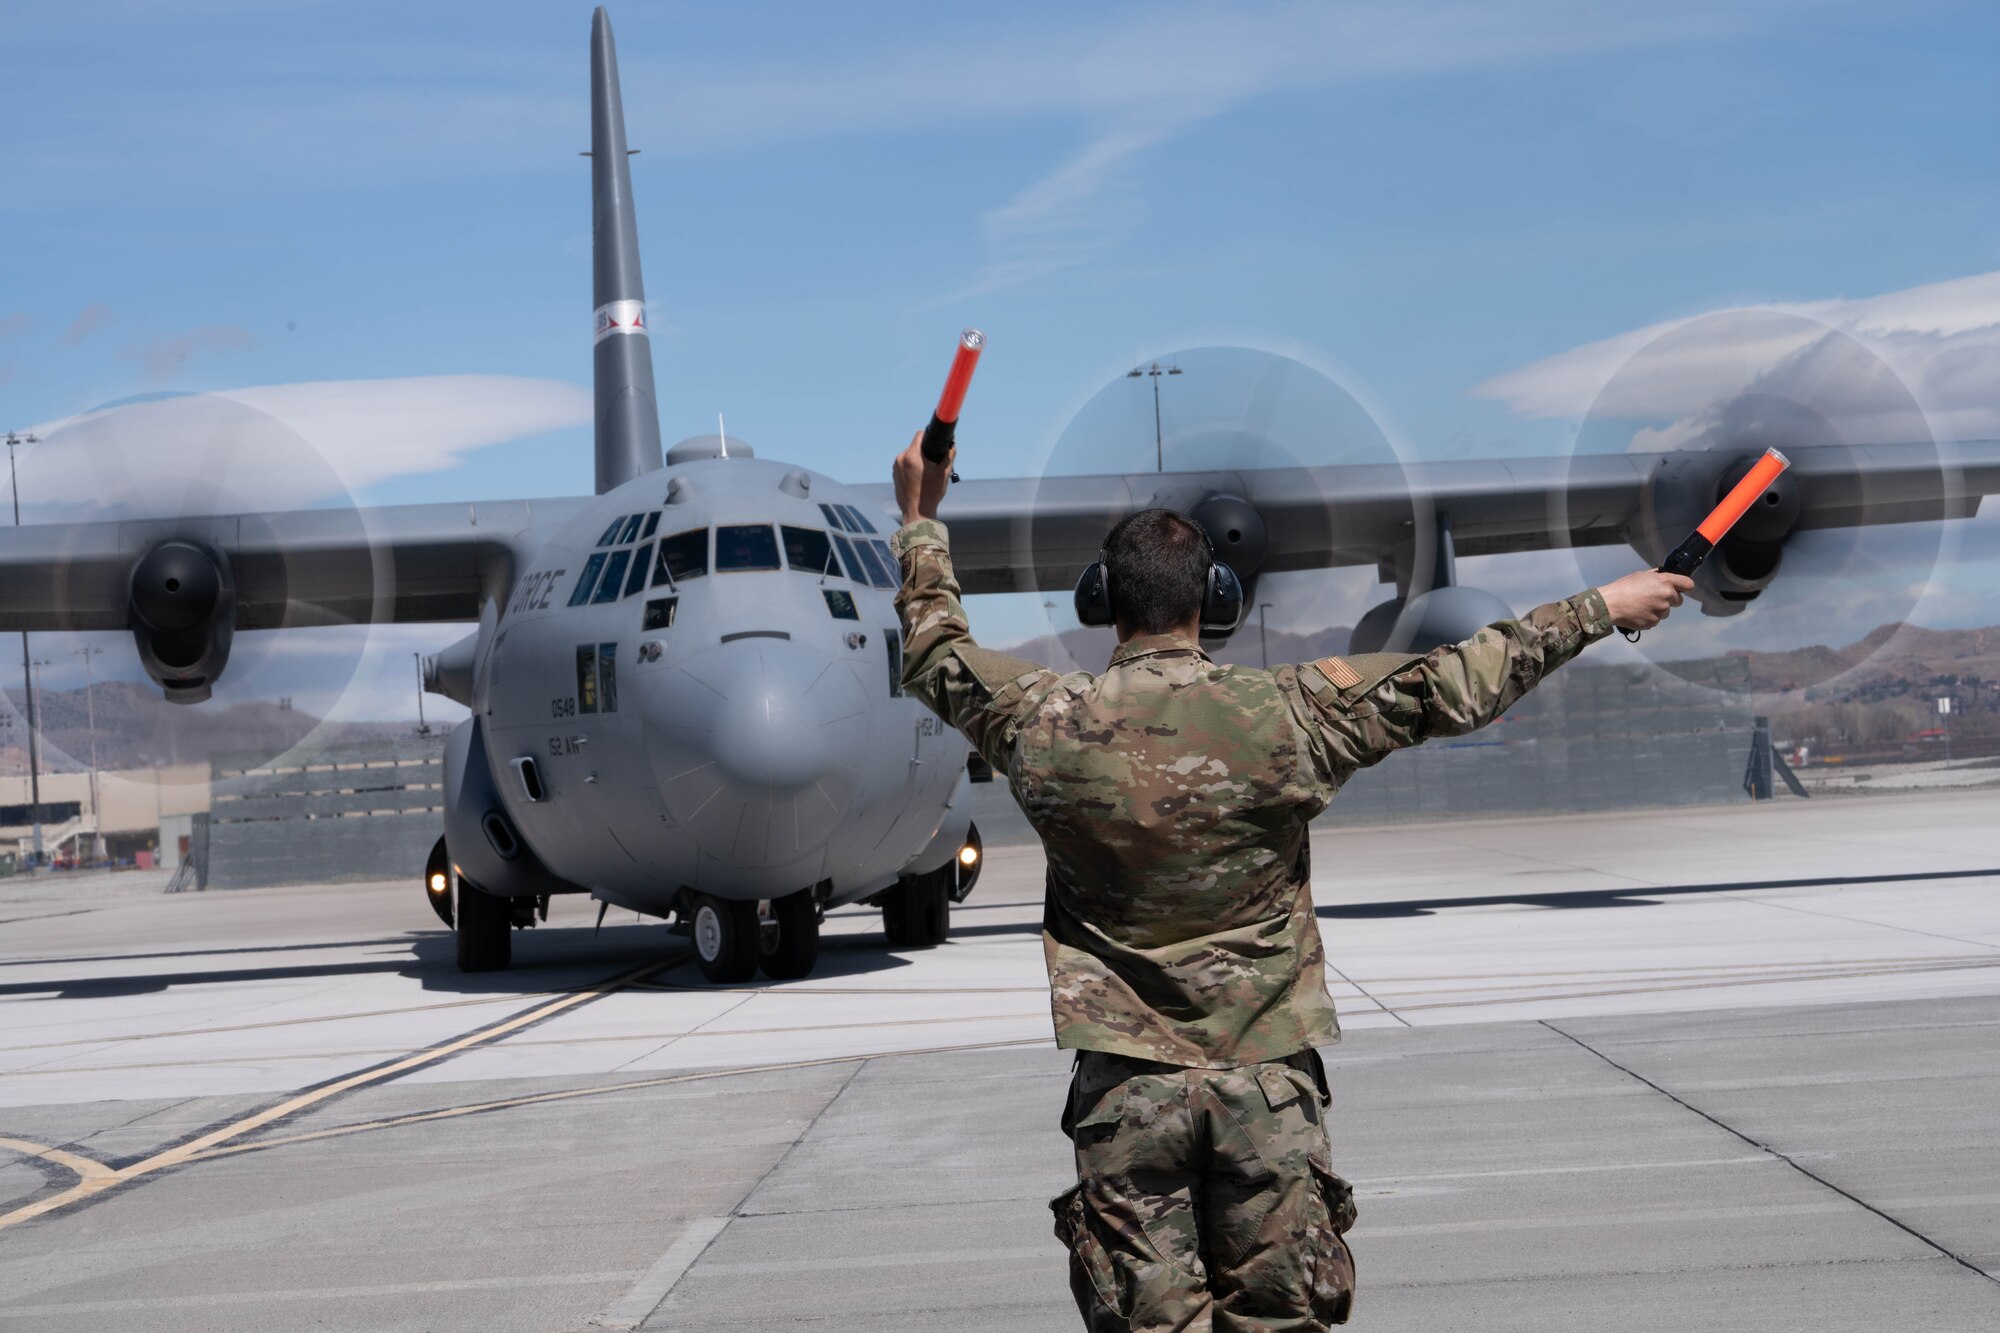 The 192nd Airlift Squadron at the Nevada Air National Guard Base hosted Wyoming's 153rd Airlift Wing for annual Advanced Mountain Airlift Tactics School training. The four-day training was conducted at the end of March 2023.